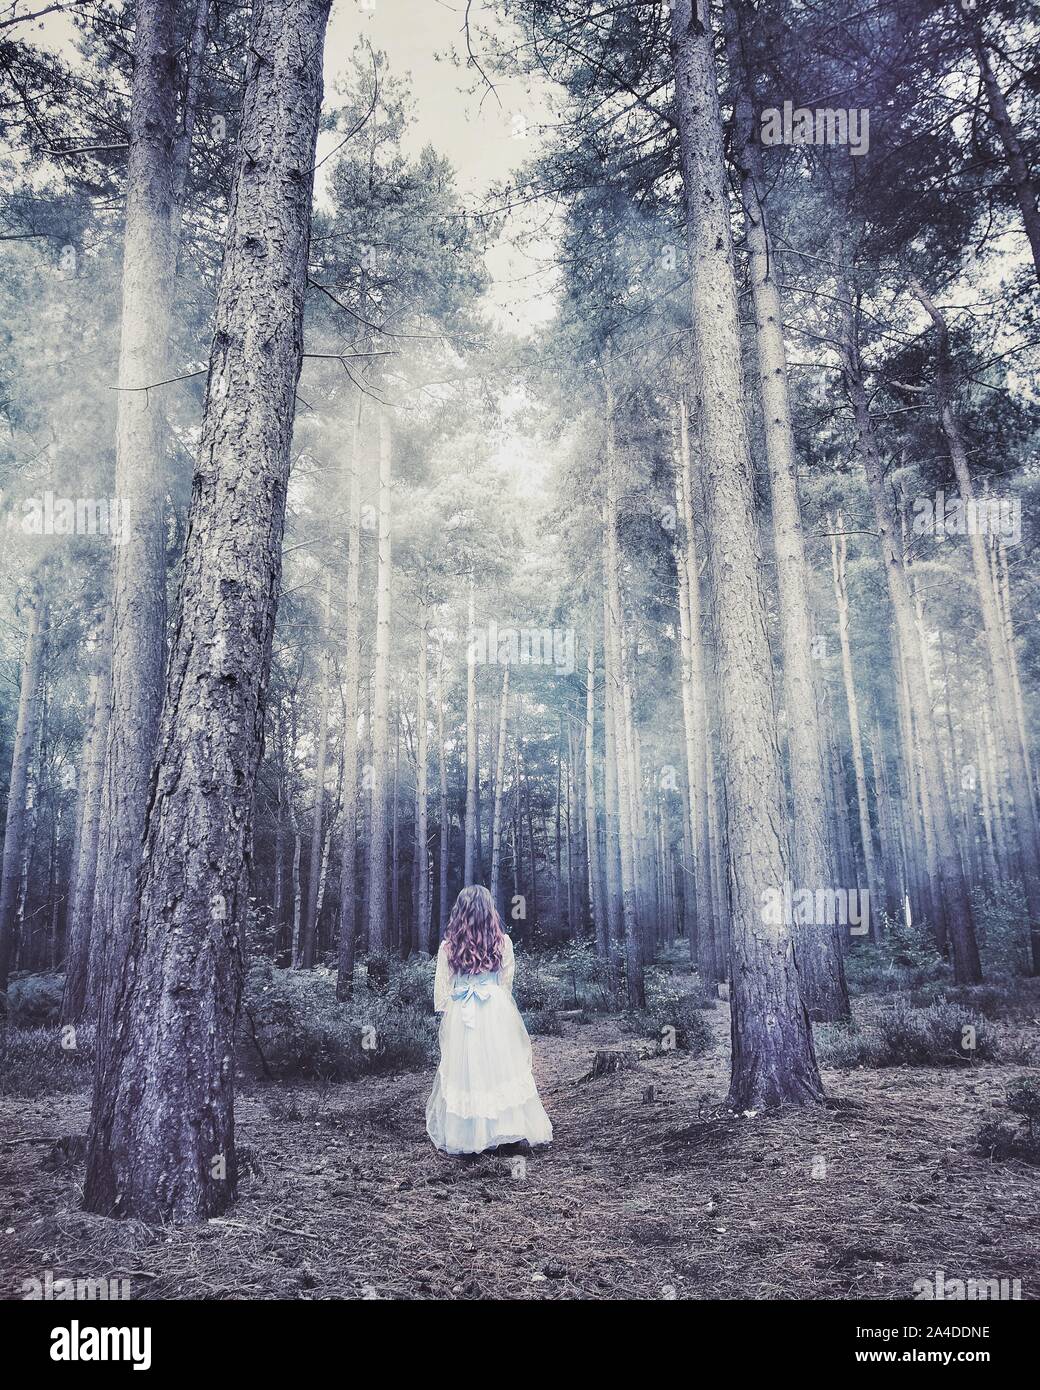 Girl in a long dress standing in a forest, Eversley, Hampshire, United Kingdom Stock Photo